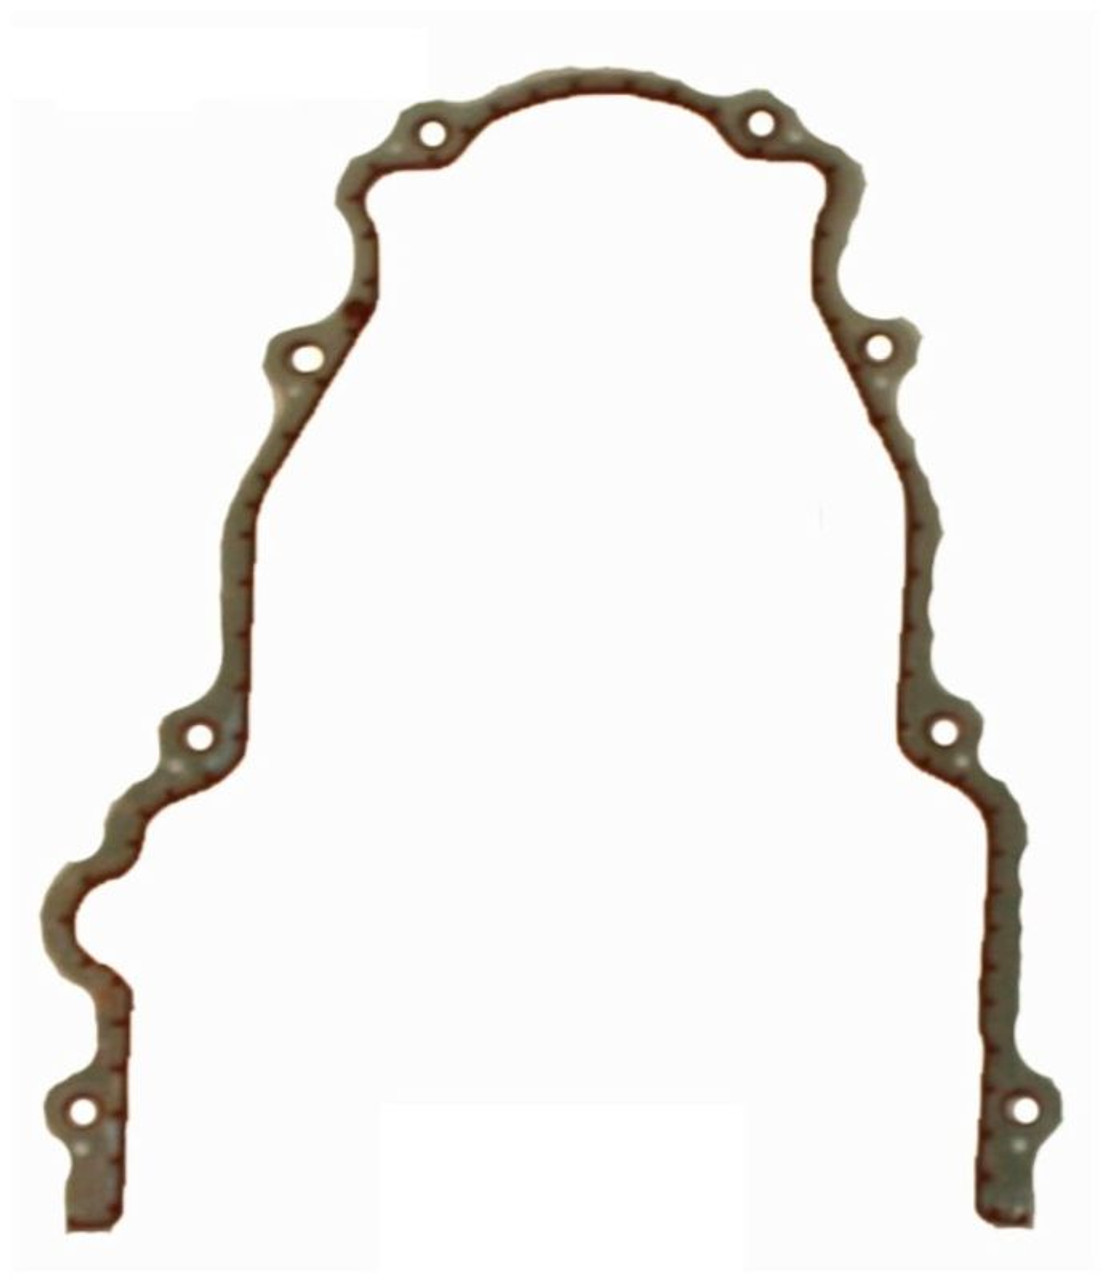 2005 Hummer H2 6.0L Engine Timing Cover Gasket TCG293-A -307